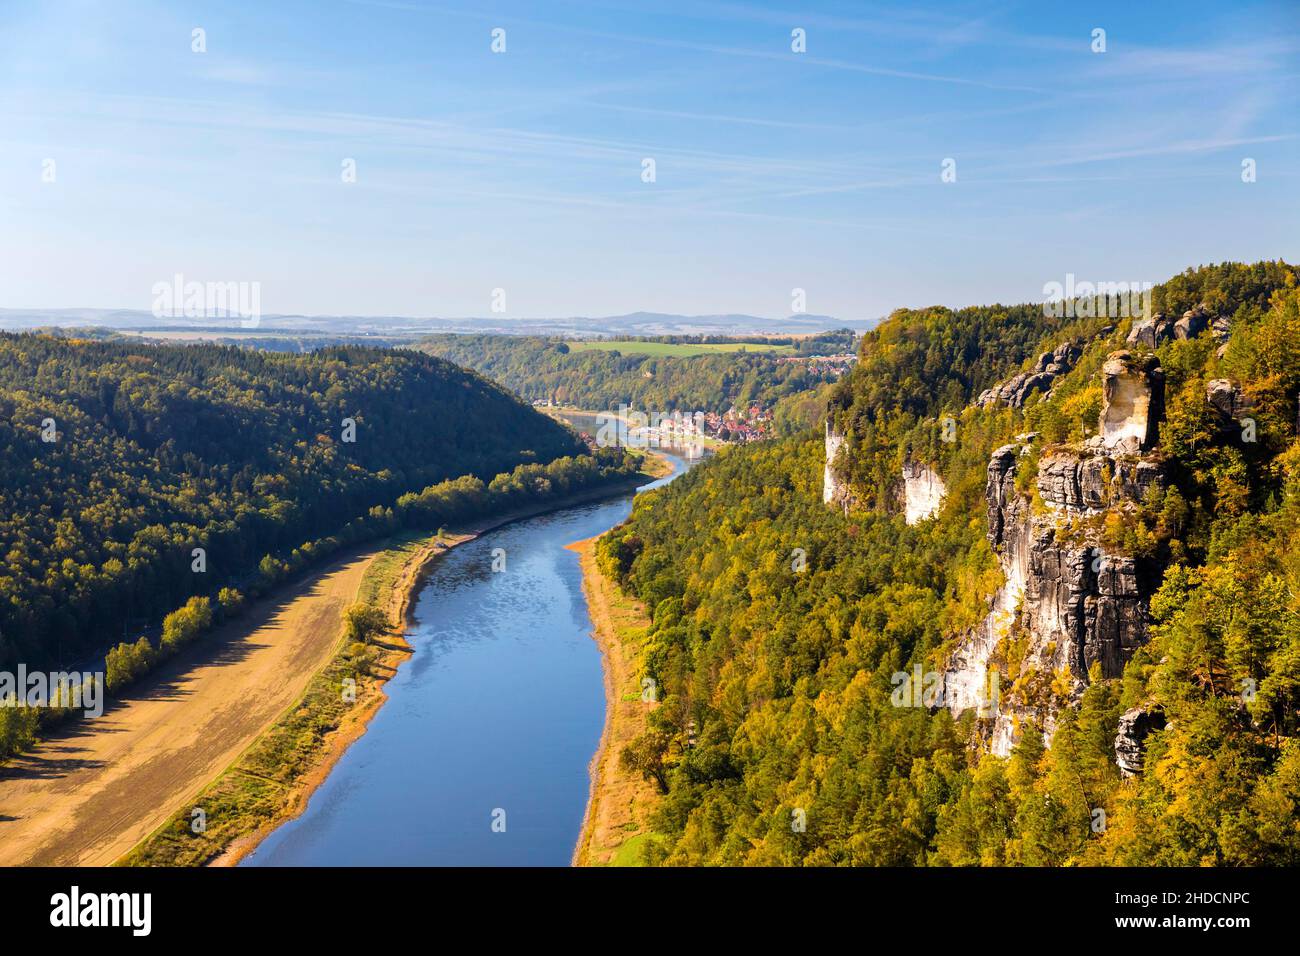 Page 8 - Deutschland Schweiz High Resolution Stock Photography and Images -  Alamy